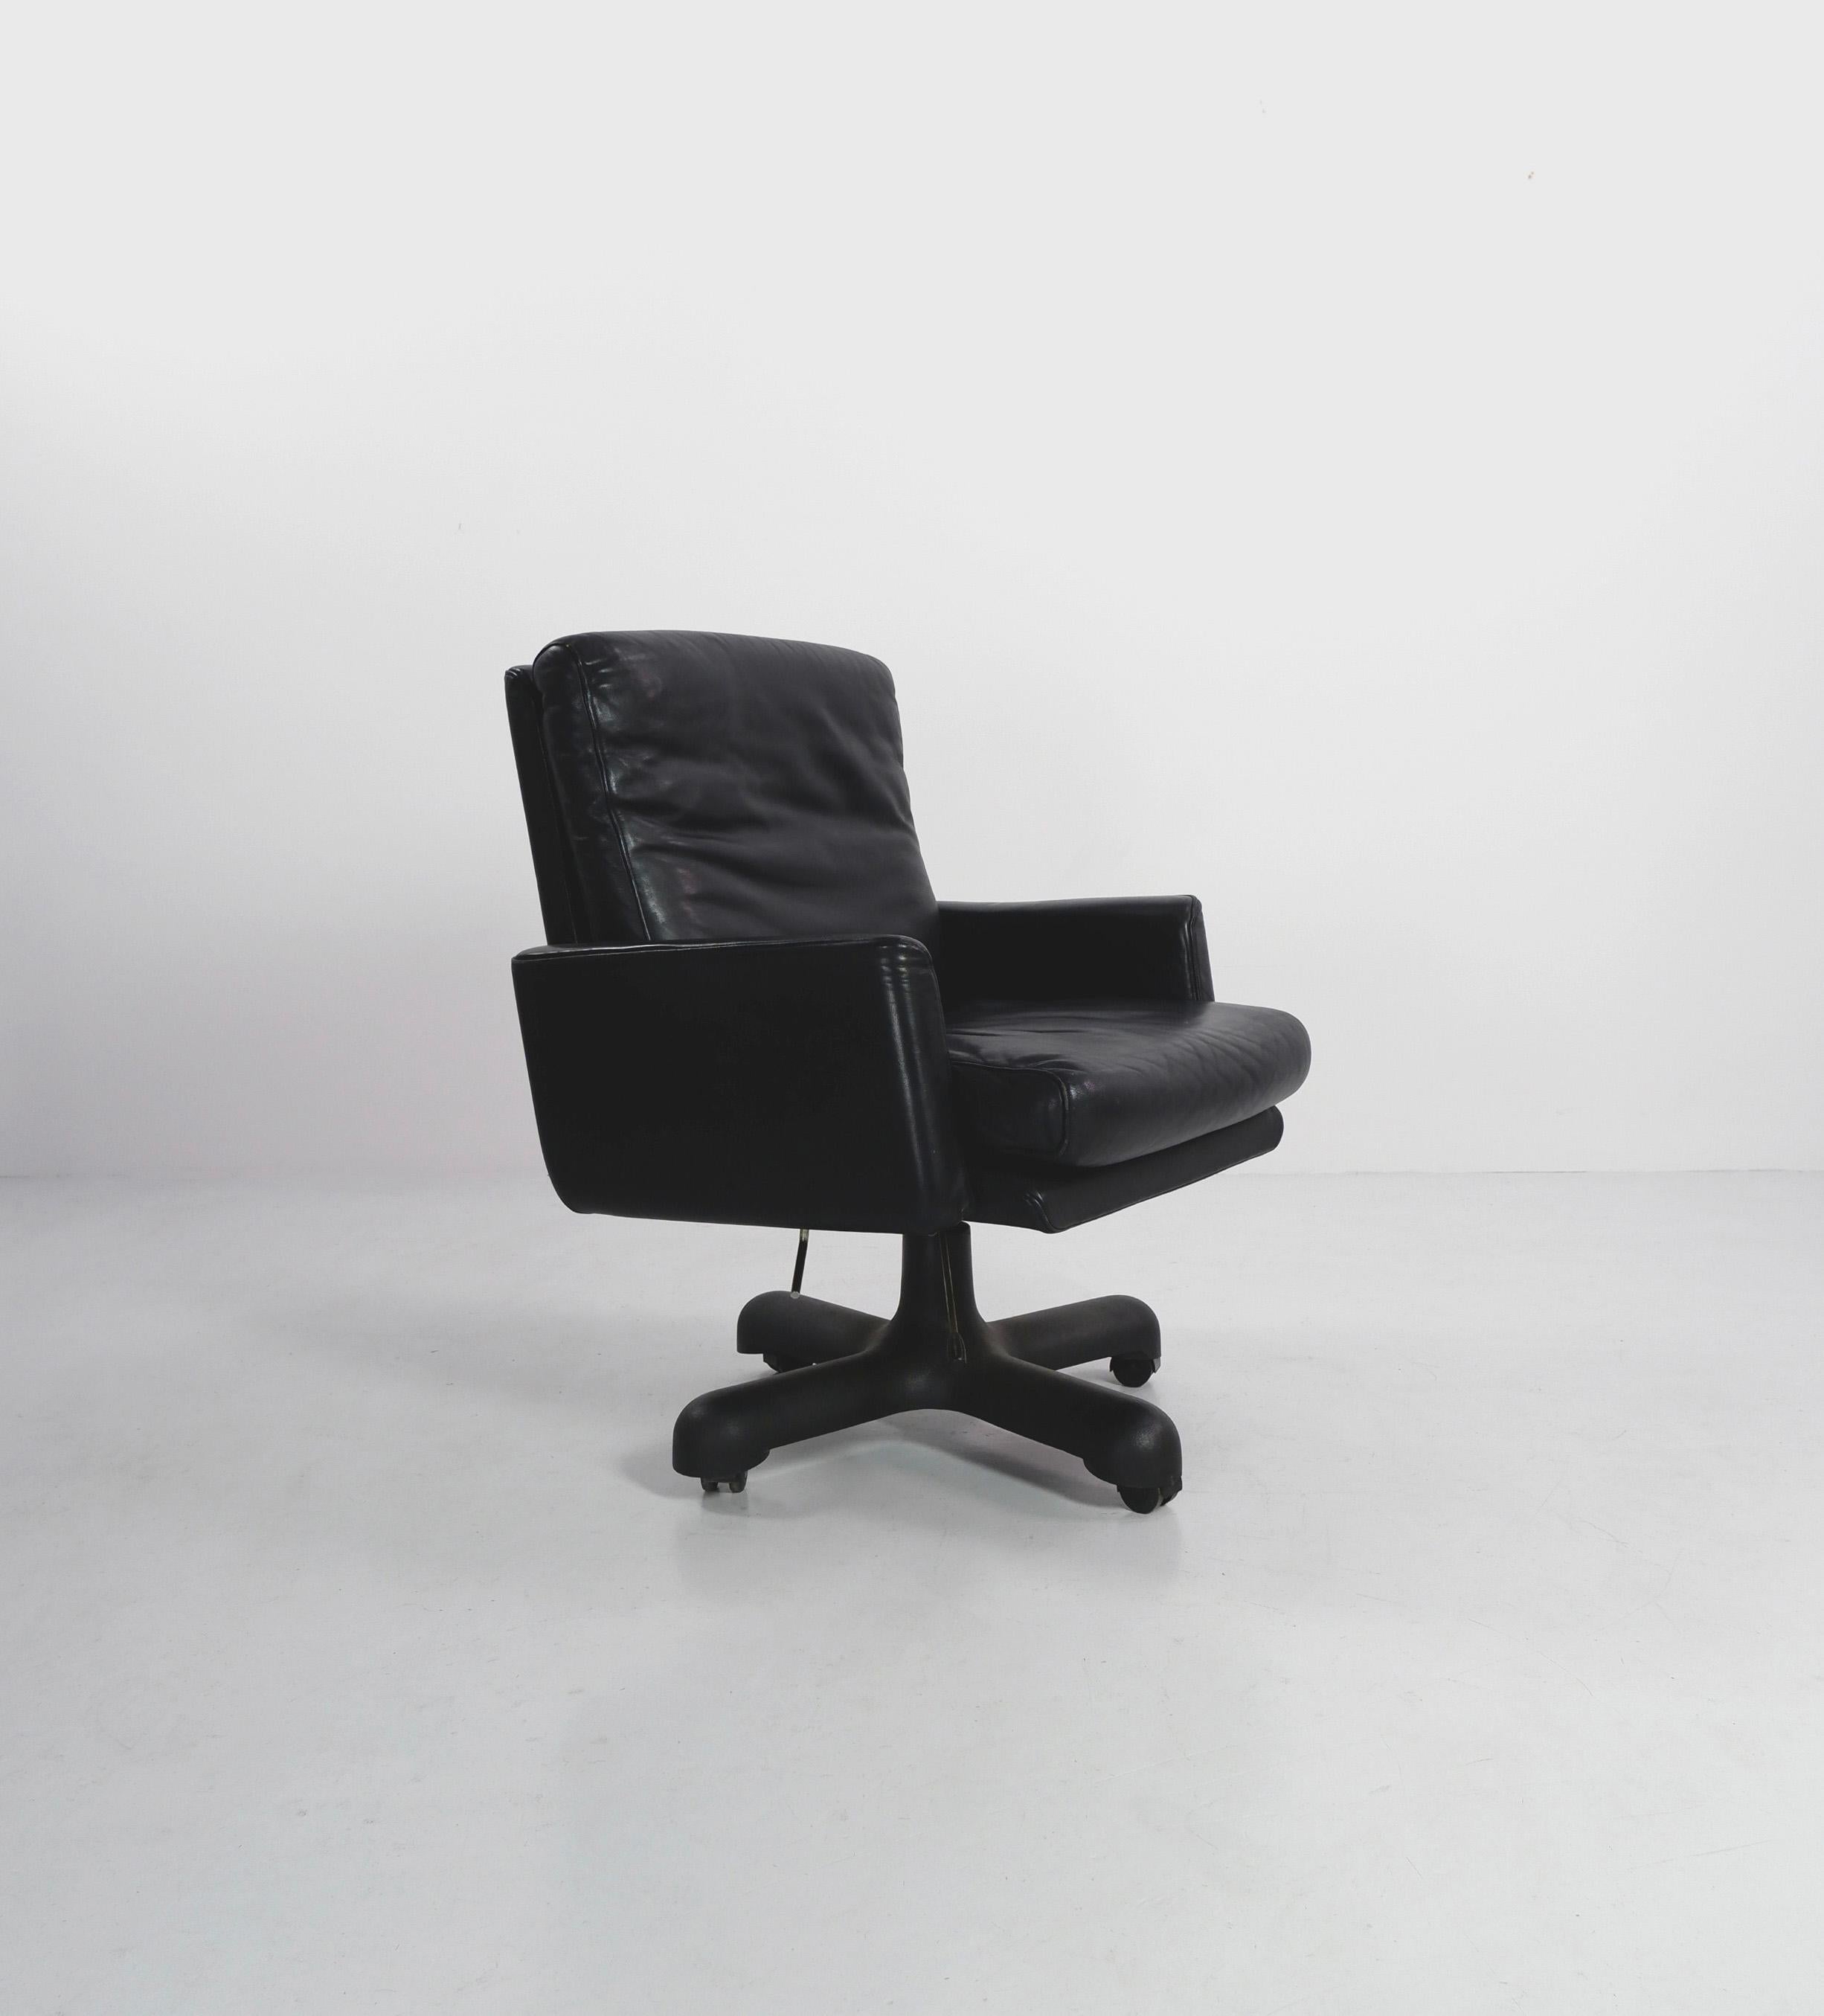 Late 20th Century leather desk chair manufactured by Marcatré.

Founded in 1975 Marcatré is synonymous with high end office furniture, working with prolific Italian architects and designers such as Mario Bellini, Achille Castiglioni, and Paolo